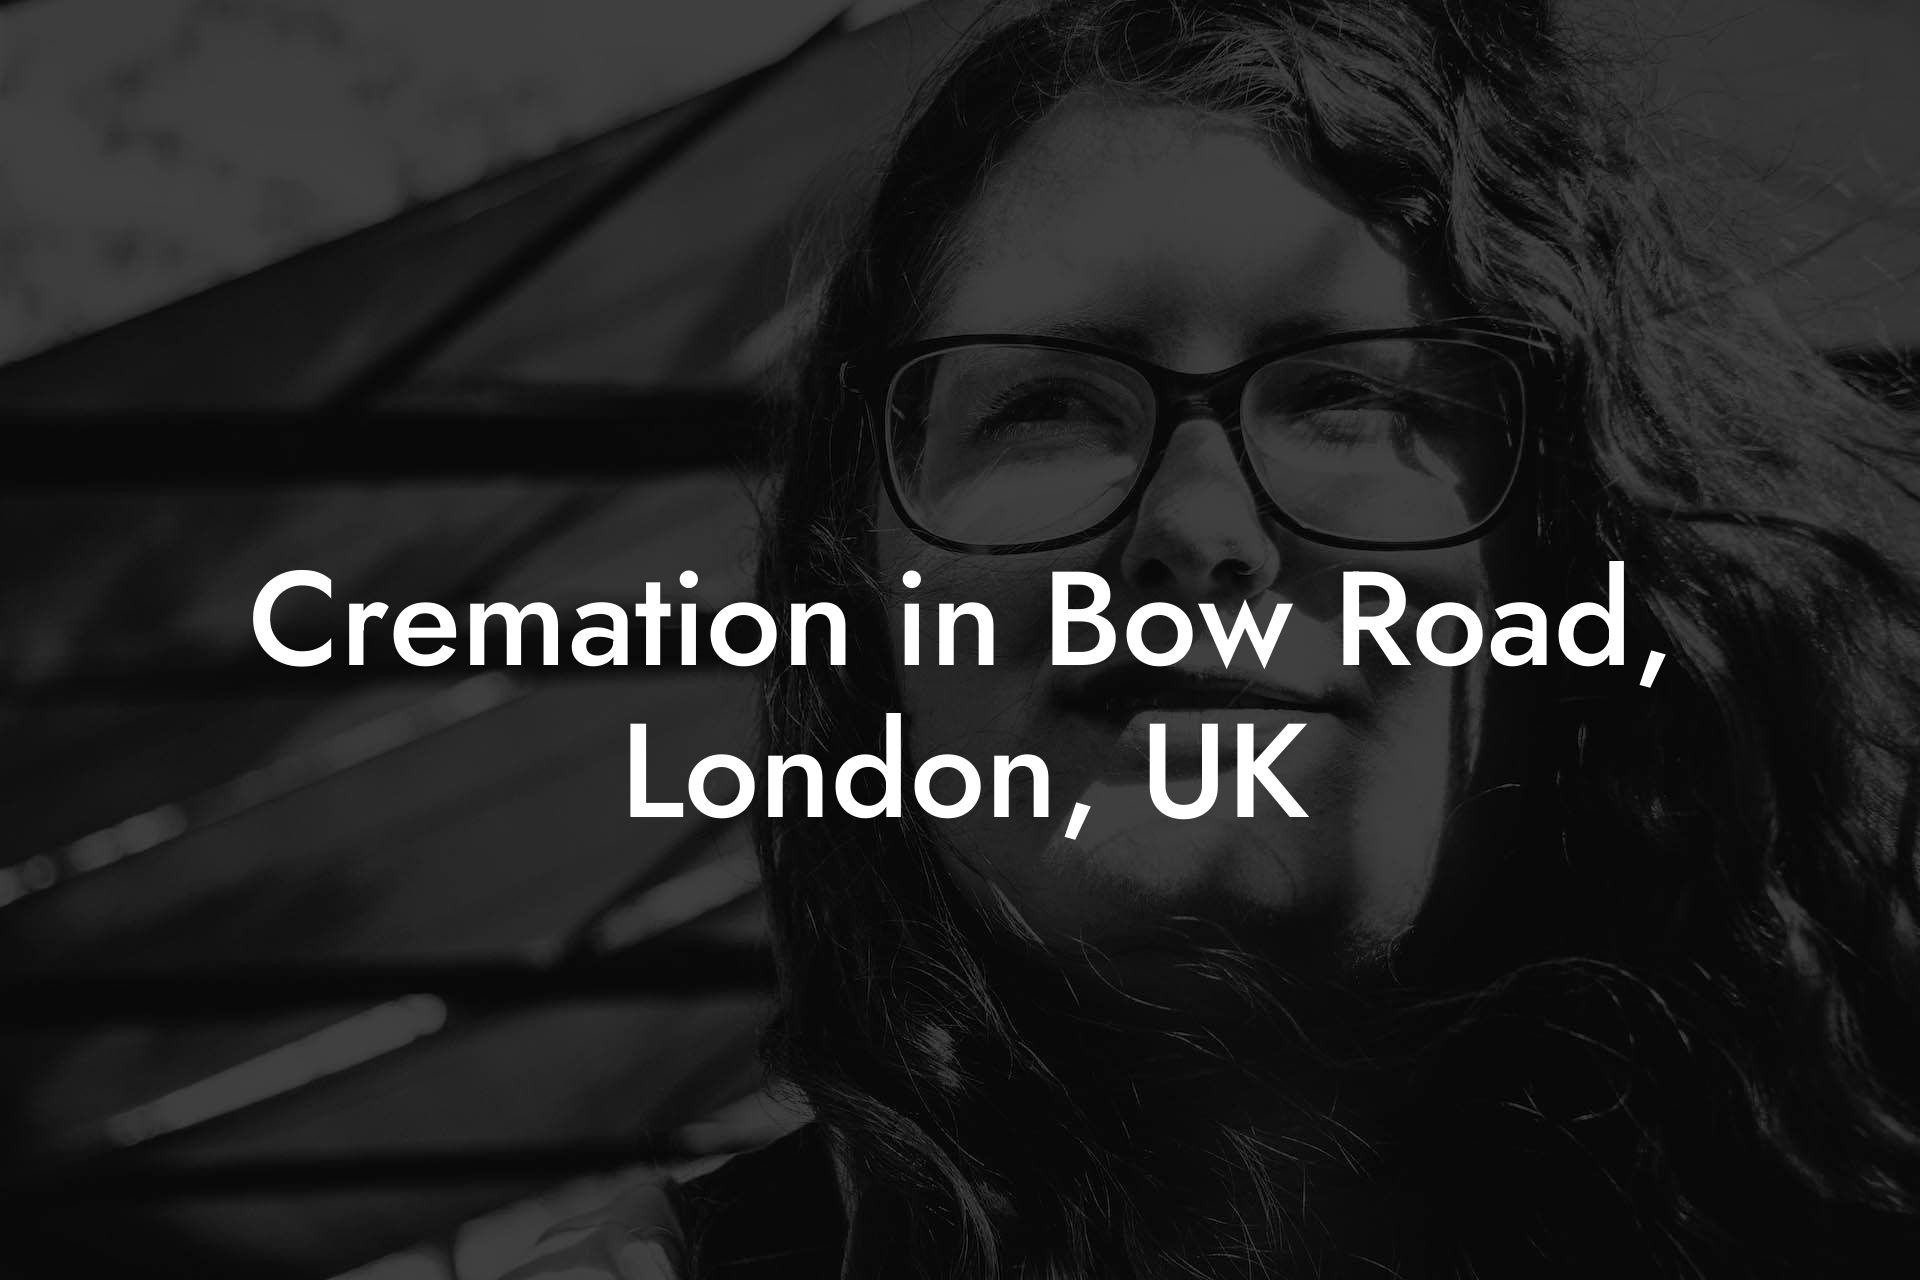 Cremation in Bow Road, London, UK